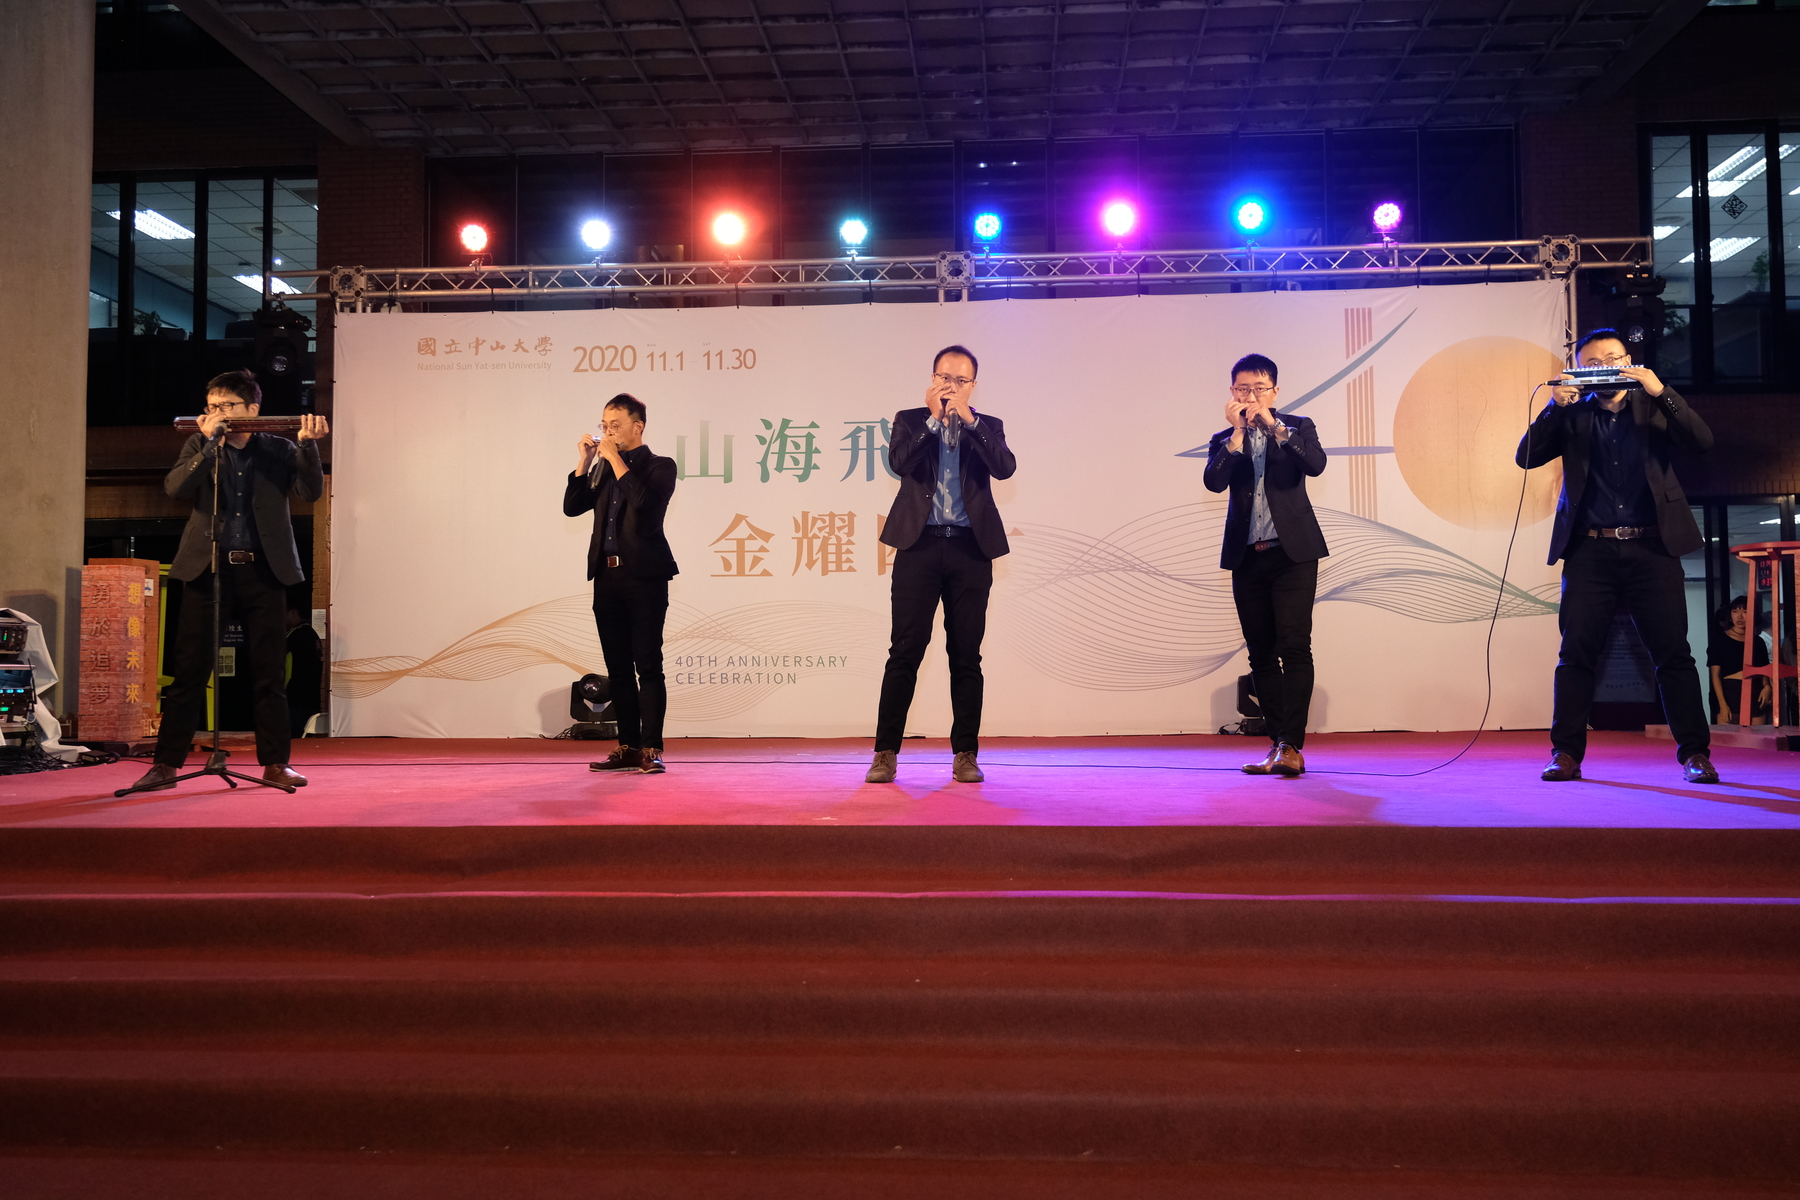 Yen-Ming Chen (on the left) performing during NSYSU 40th Anniversary celebrations